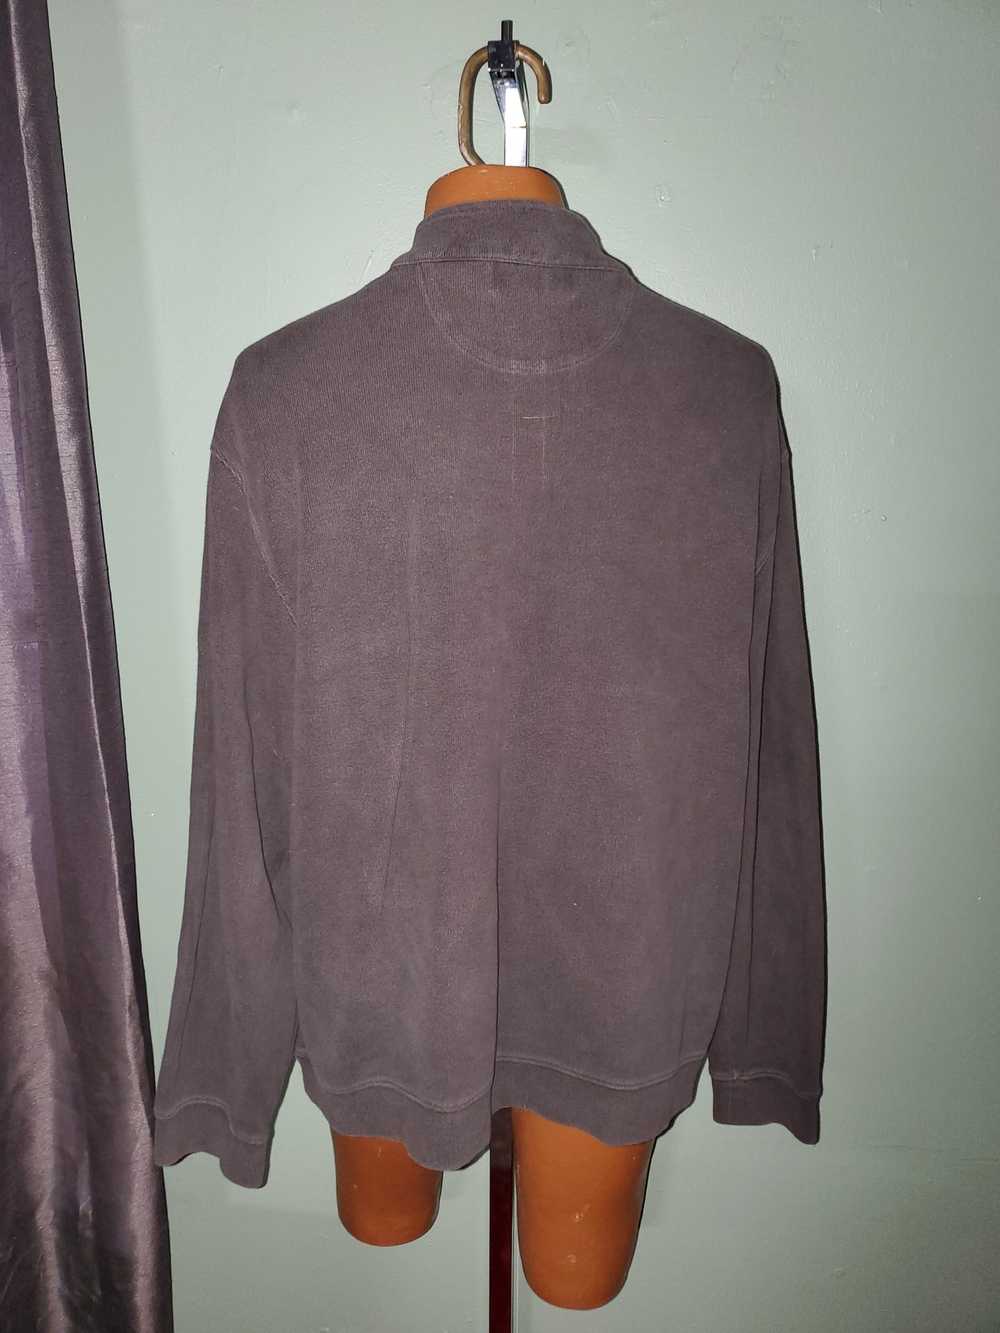 Chaps Chaps Pullover Size XL - image 2